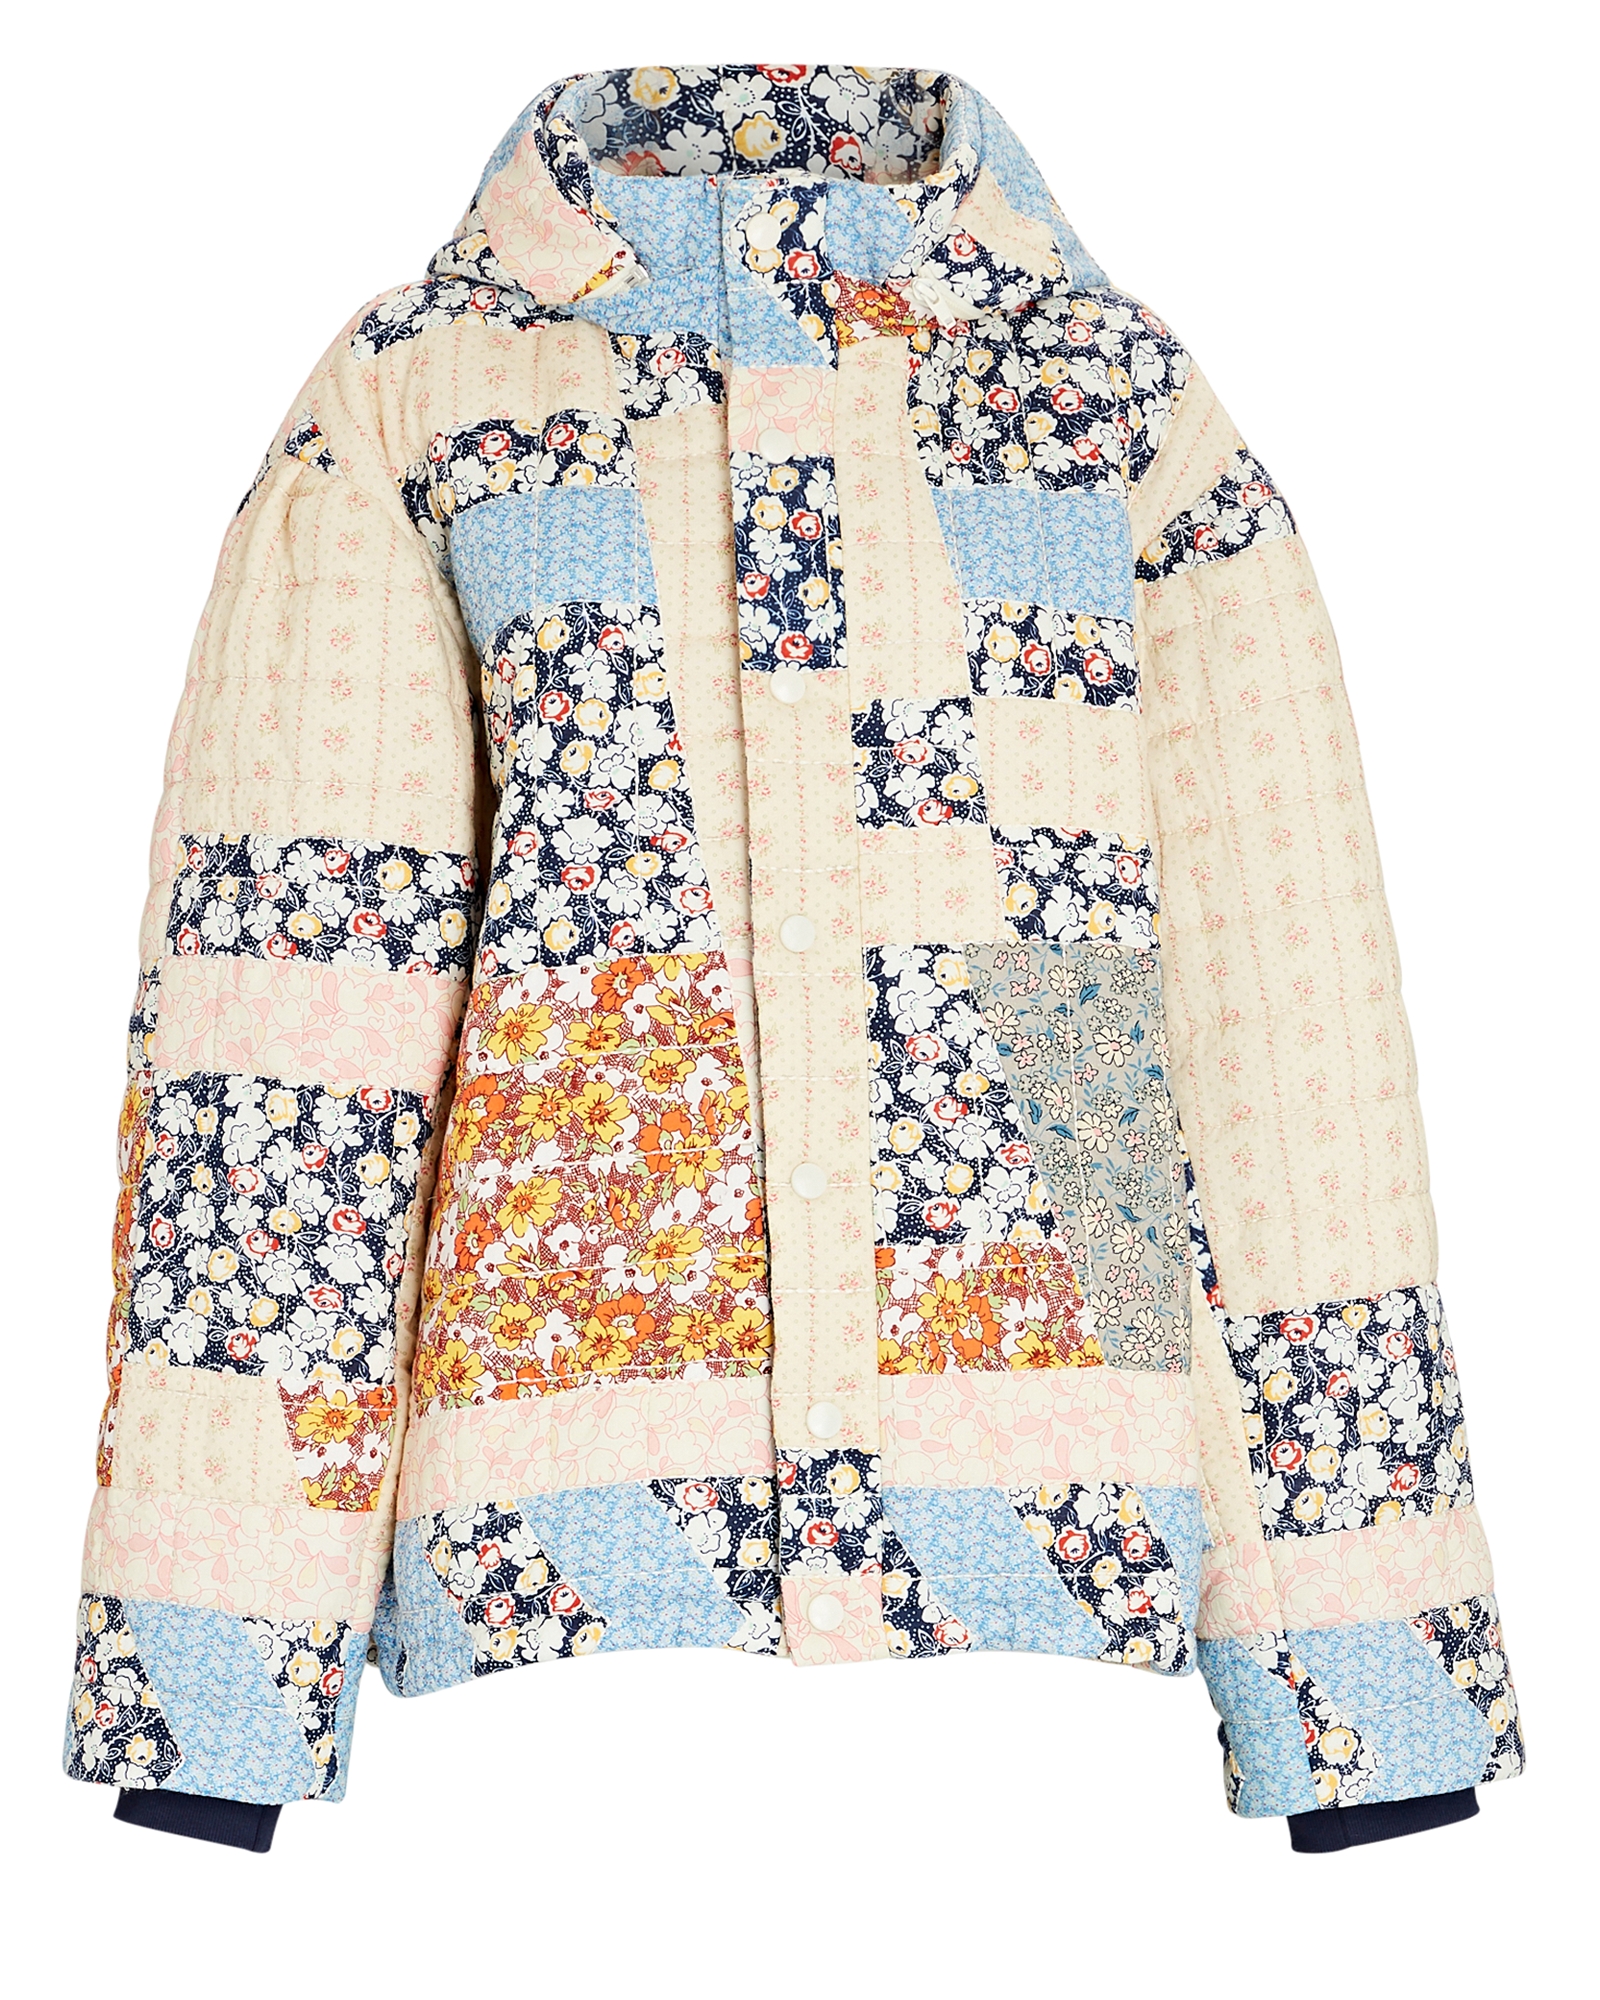 Sea Sydney Quilted Patchwork Puffer Jacket | INTERMIX®